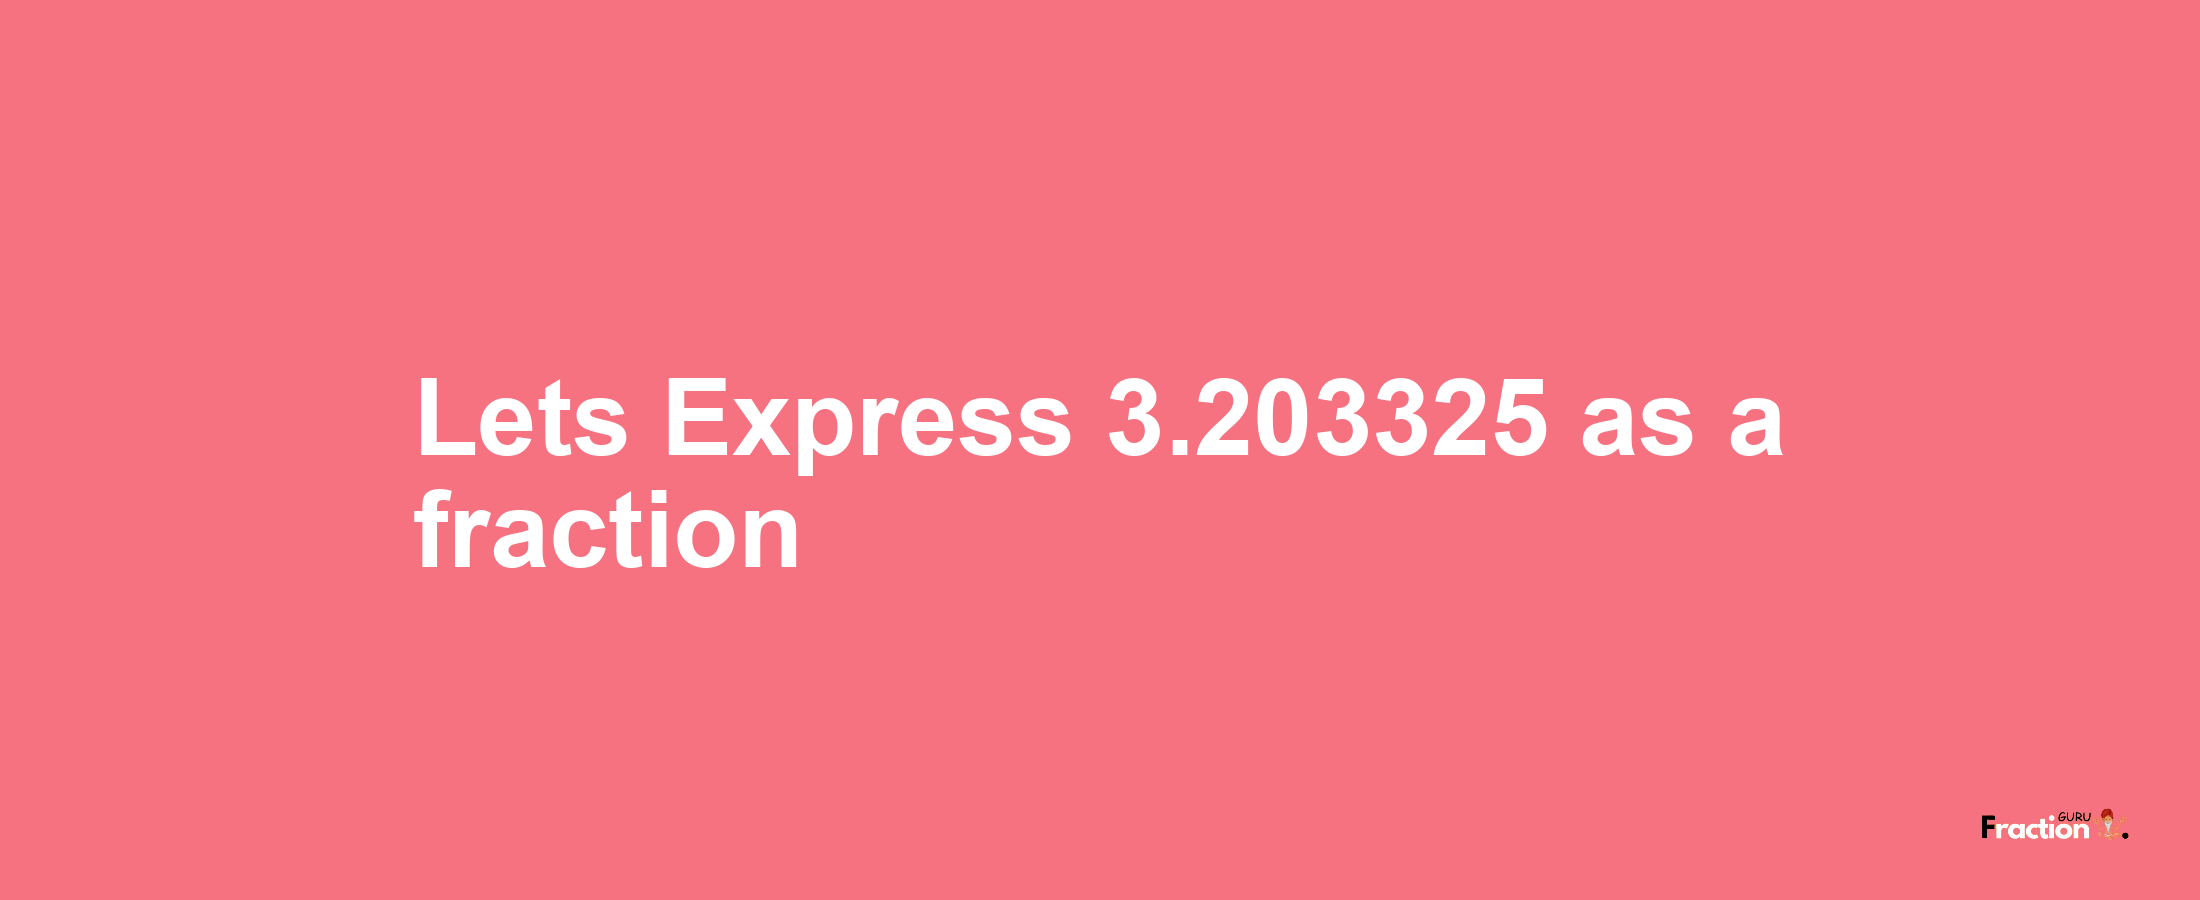 Lets Express 3.203325 as afraction